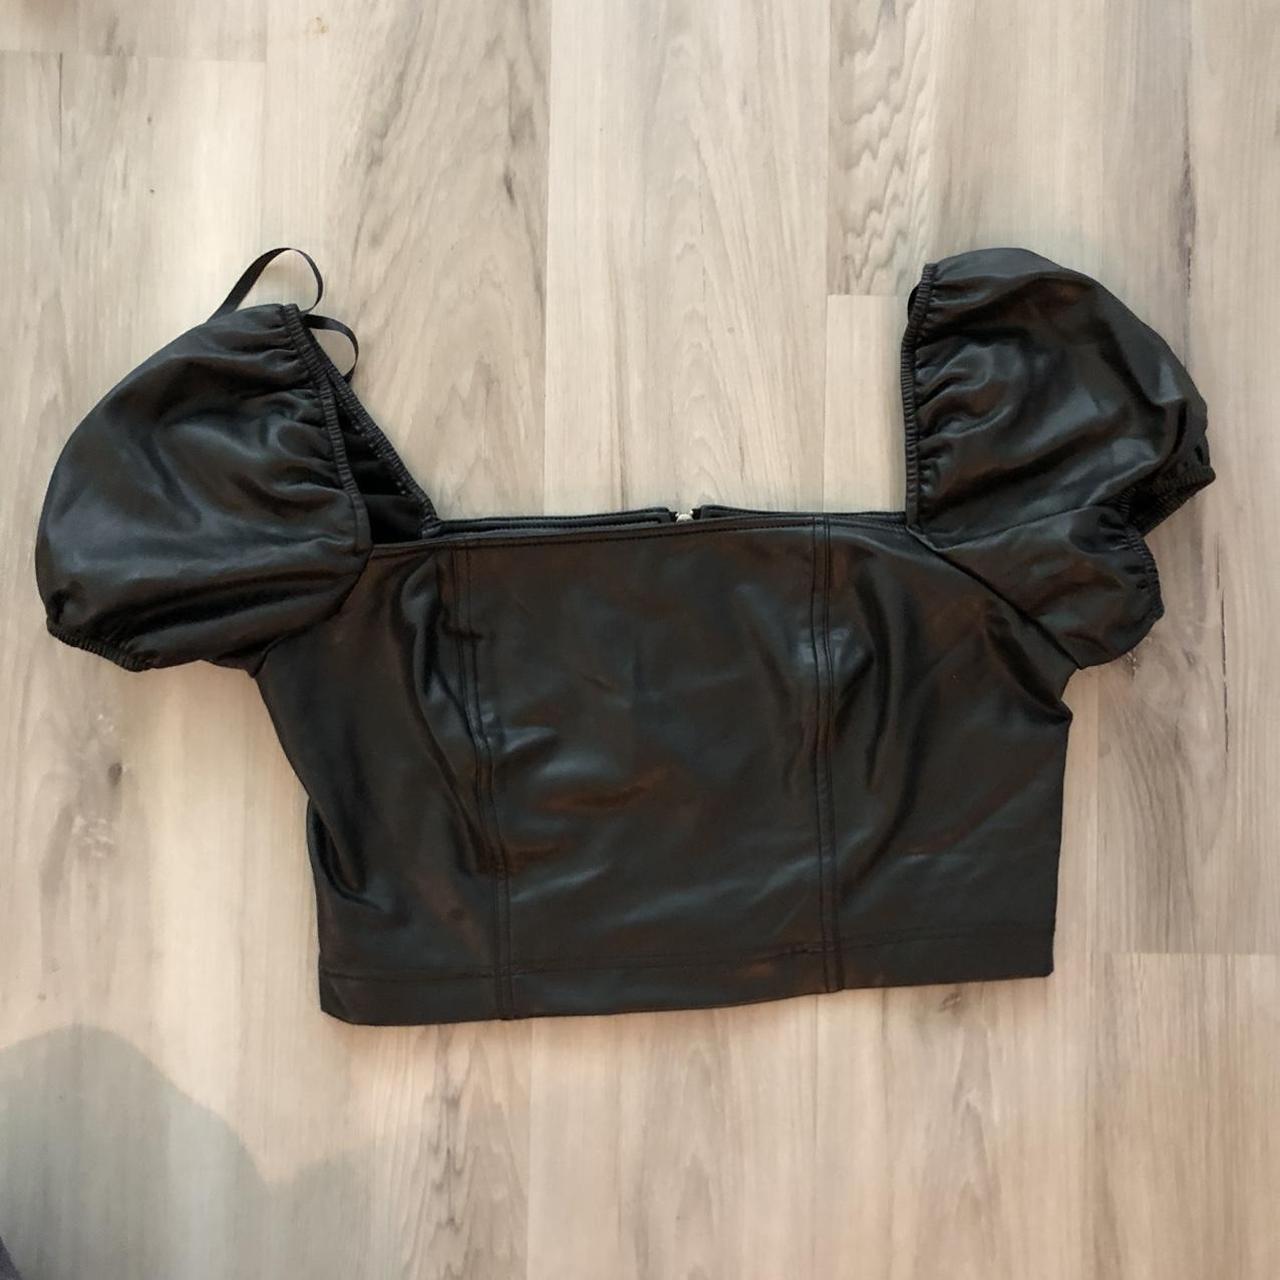 NWT 7 for all Mankind faux leather crop top. This is - Depop